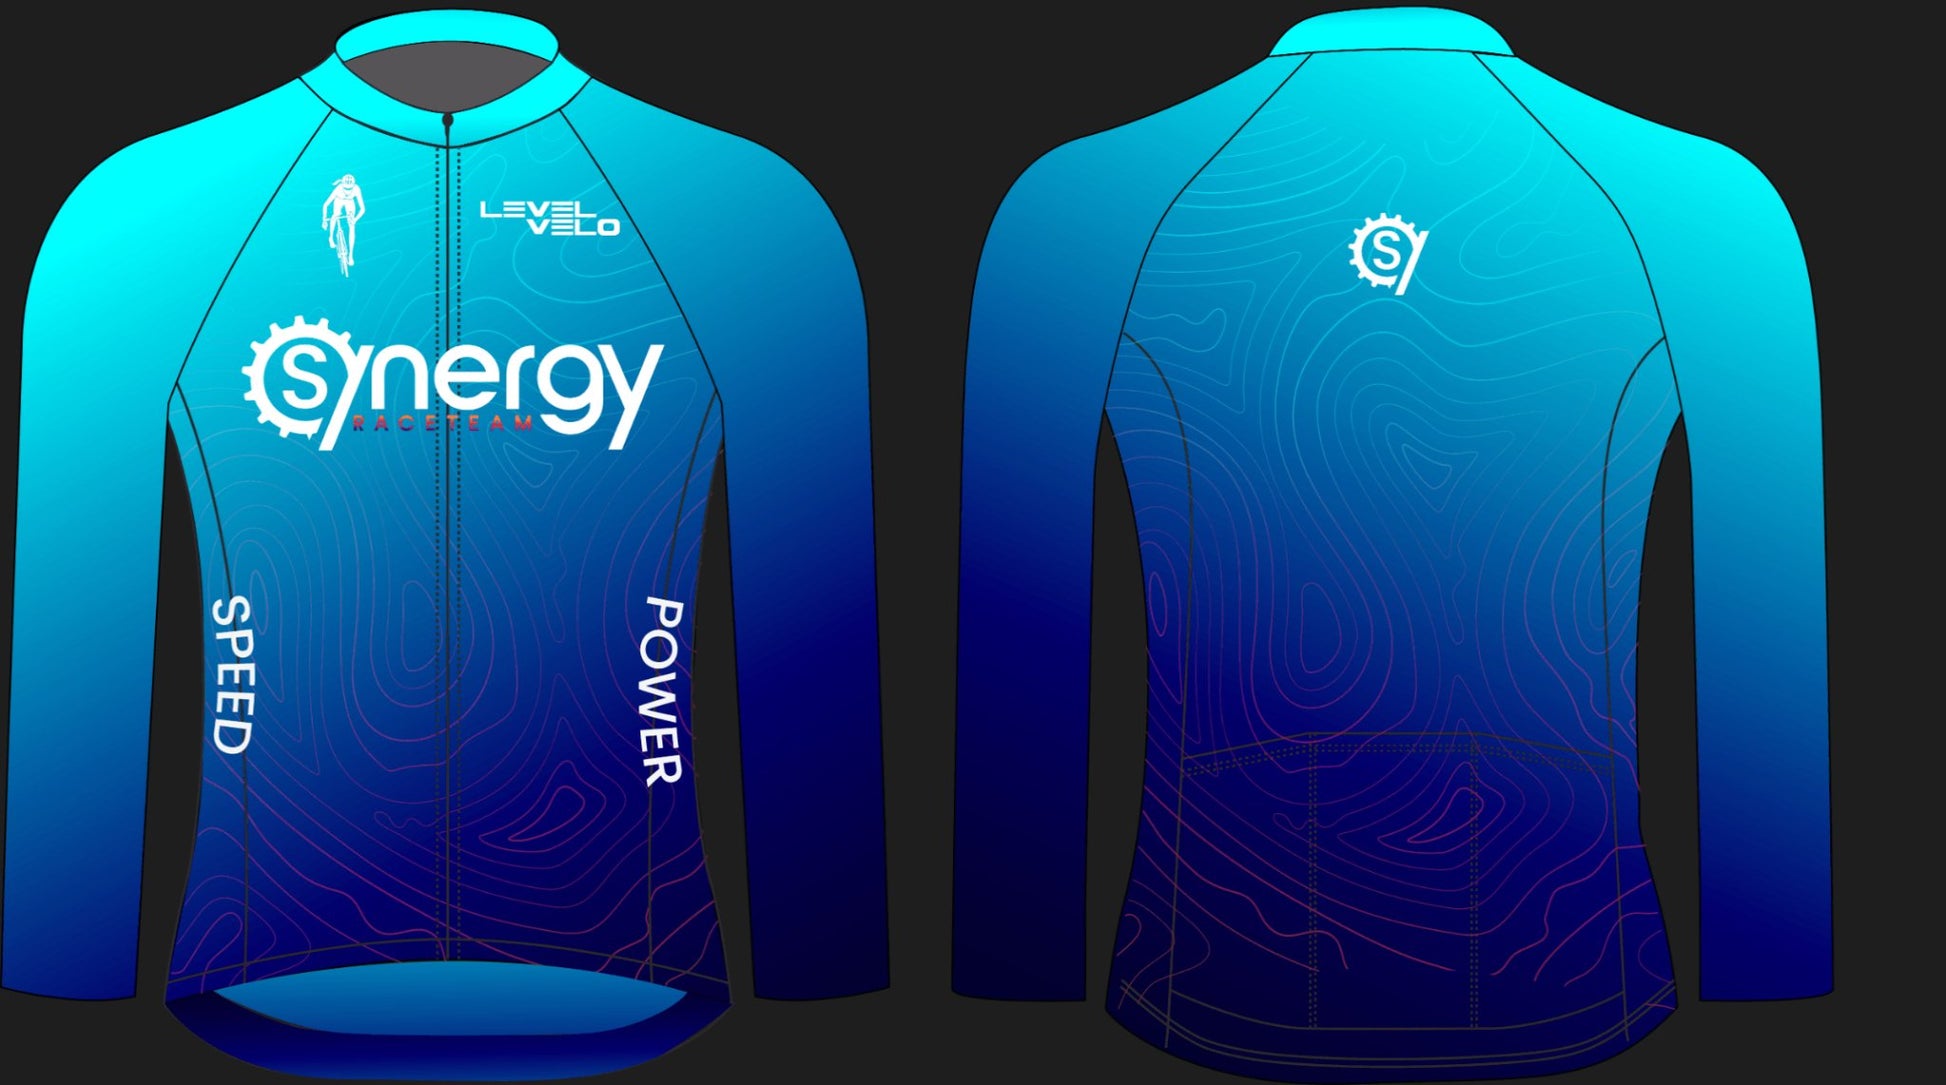 Synergy Long Sleeve Thermal Jersey Mens fit - LEVEL VELO